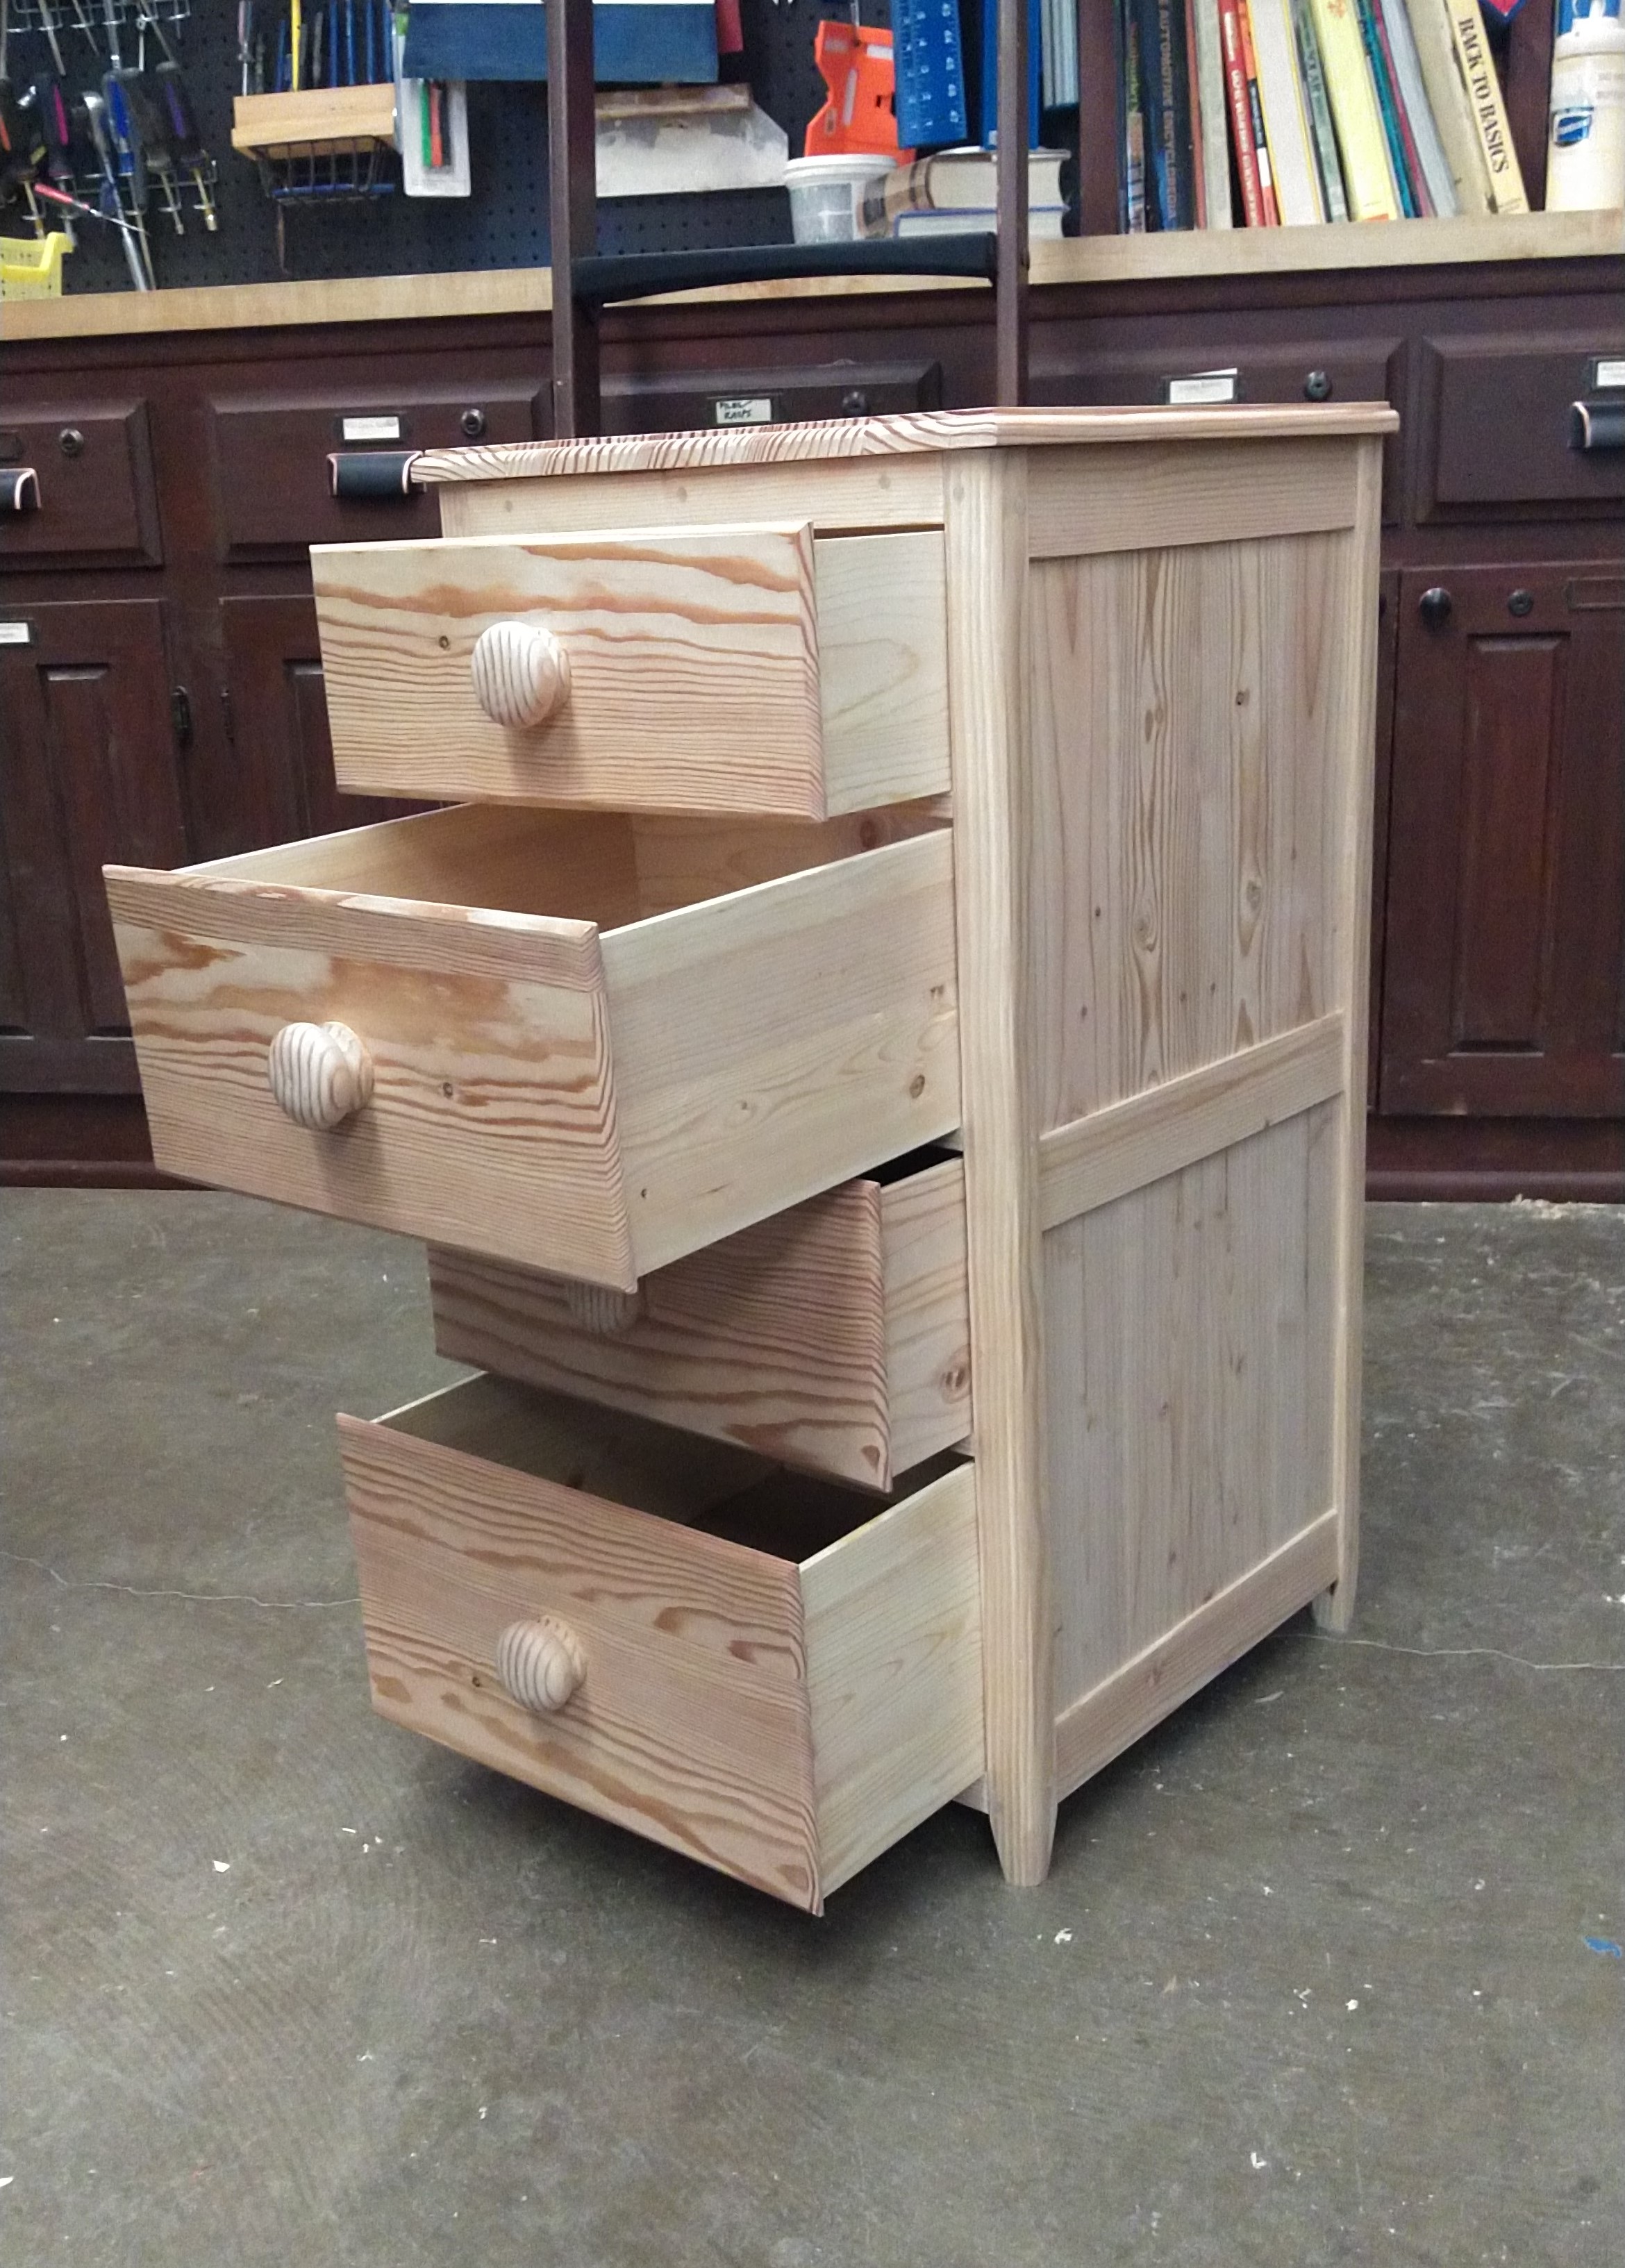 A nightstand with drawers